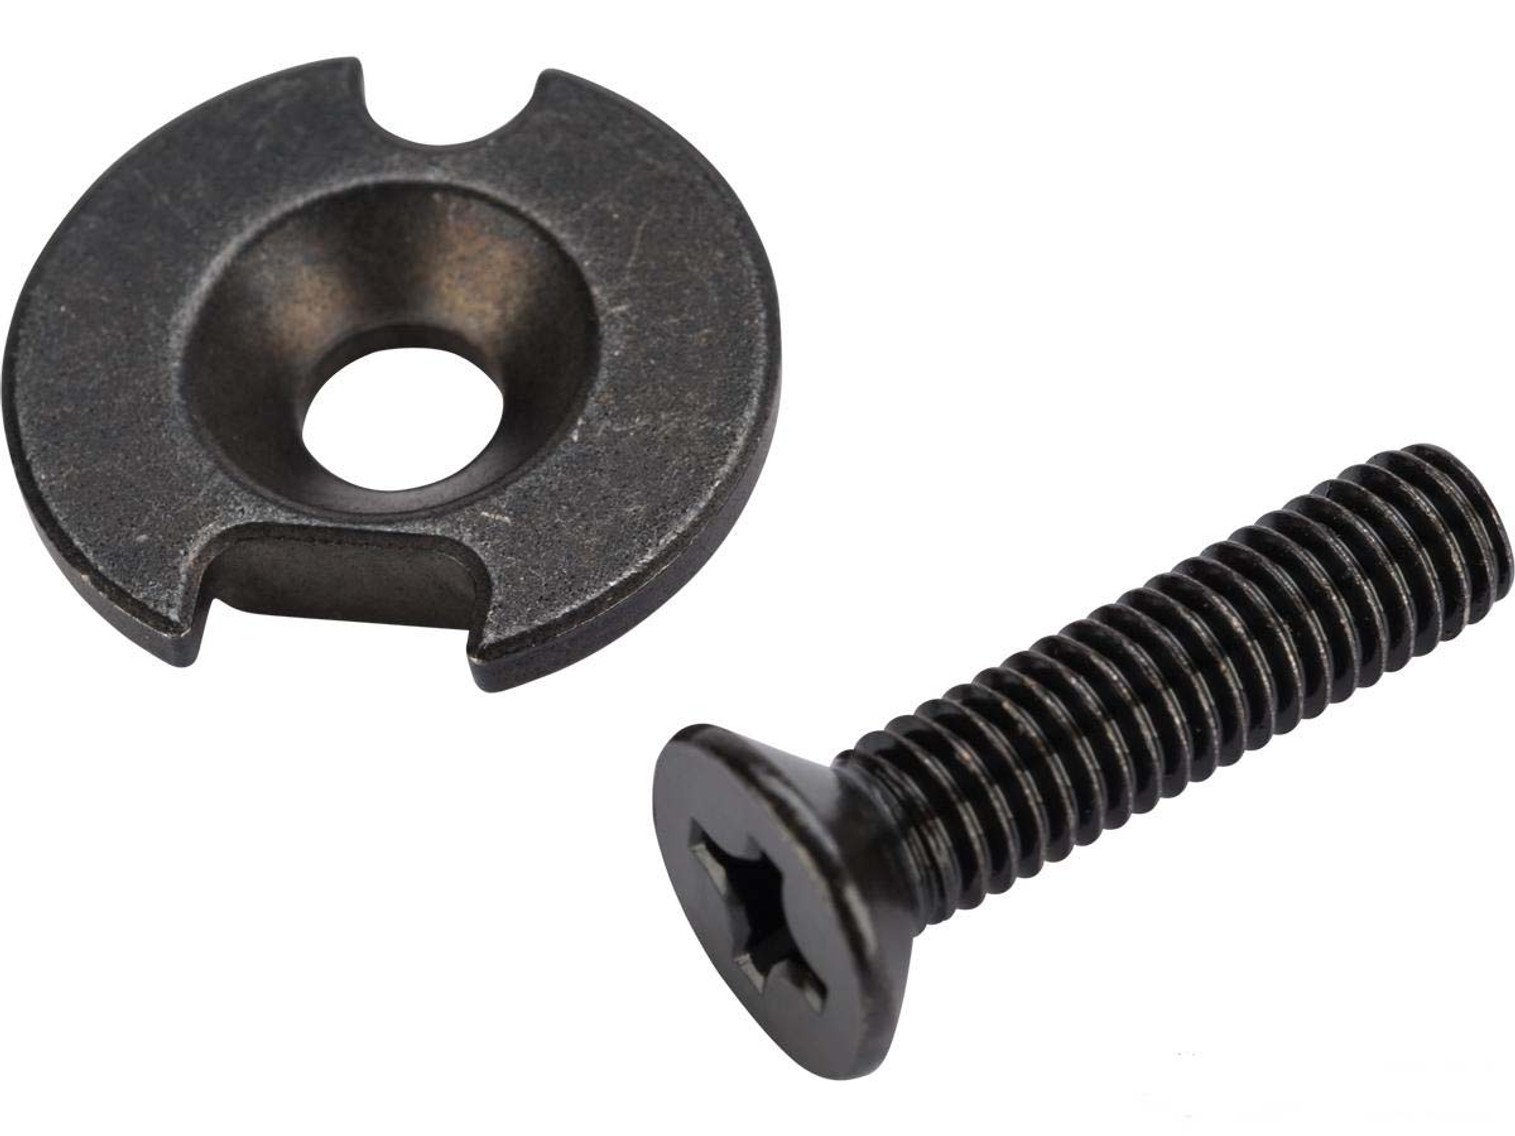 Krytac Factory Replacement Trident Buffer Tube Screw Assembly